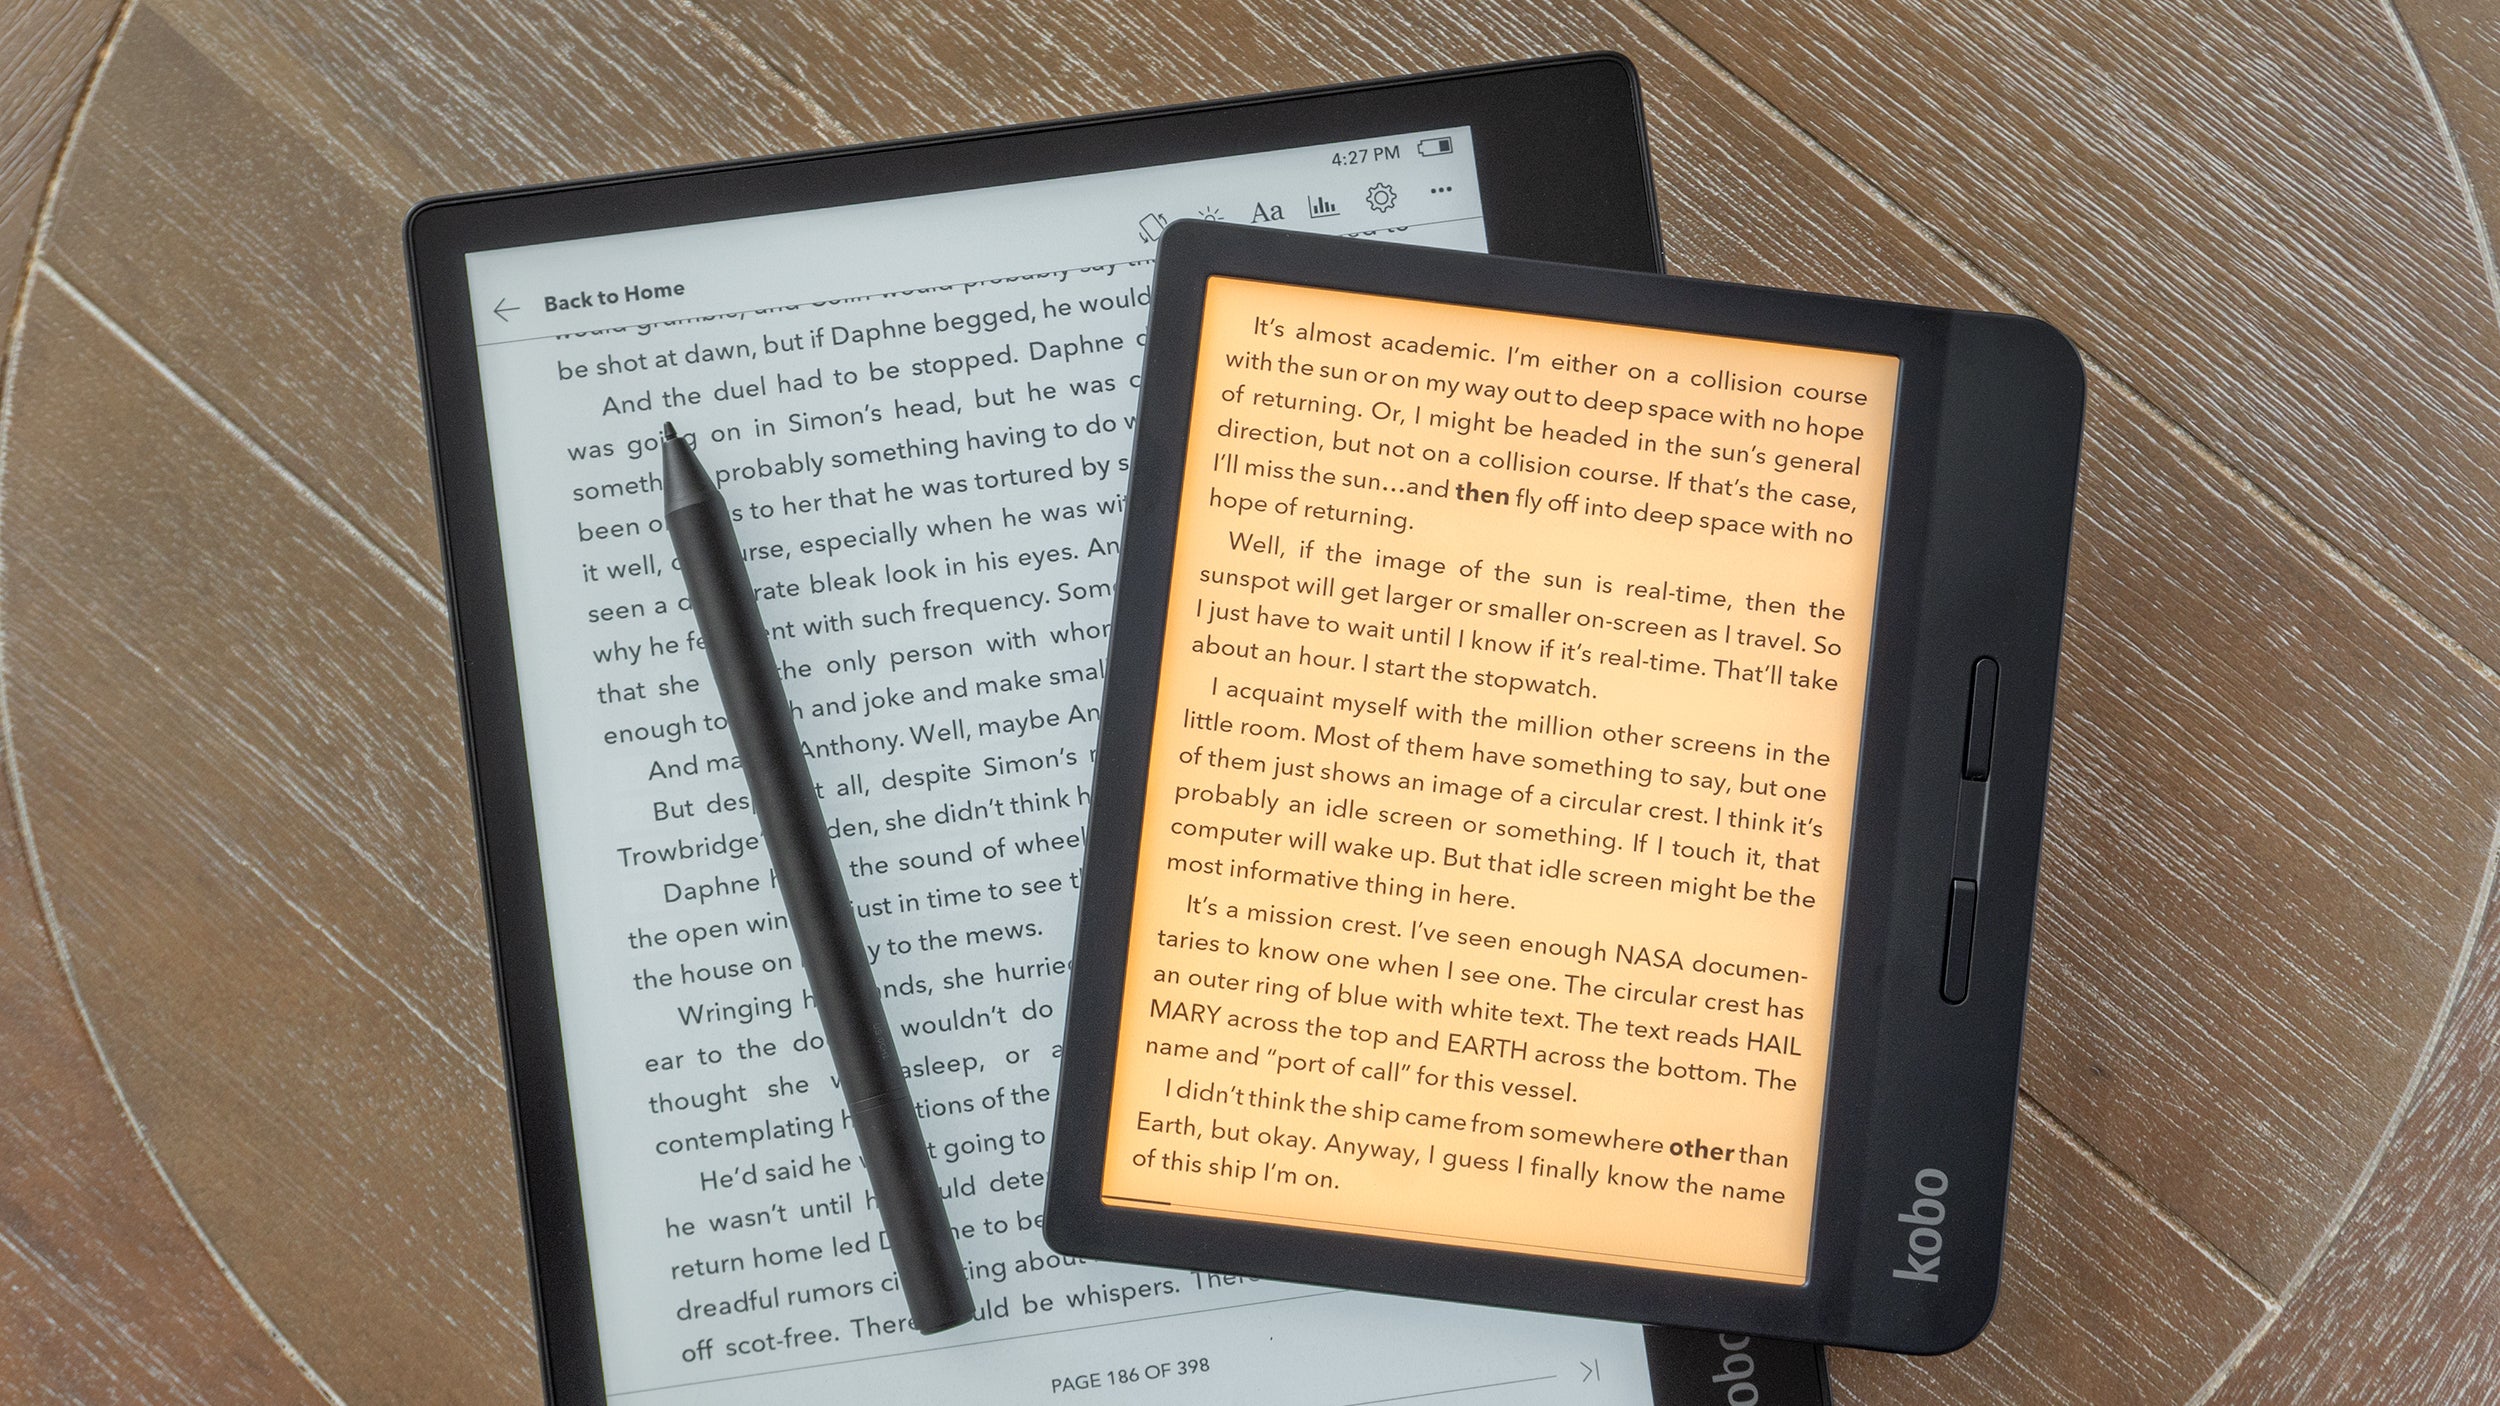 The Kobo Elipsa's self-illuminated screen is a big plus over the reMarkable 2, but it doesn't offer the colour temperature adjustments that the Kobo Forma and other e-readers do. (Photo: Andrew Liszewski/Gizmodo)